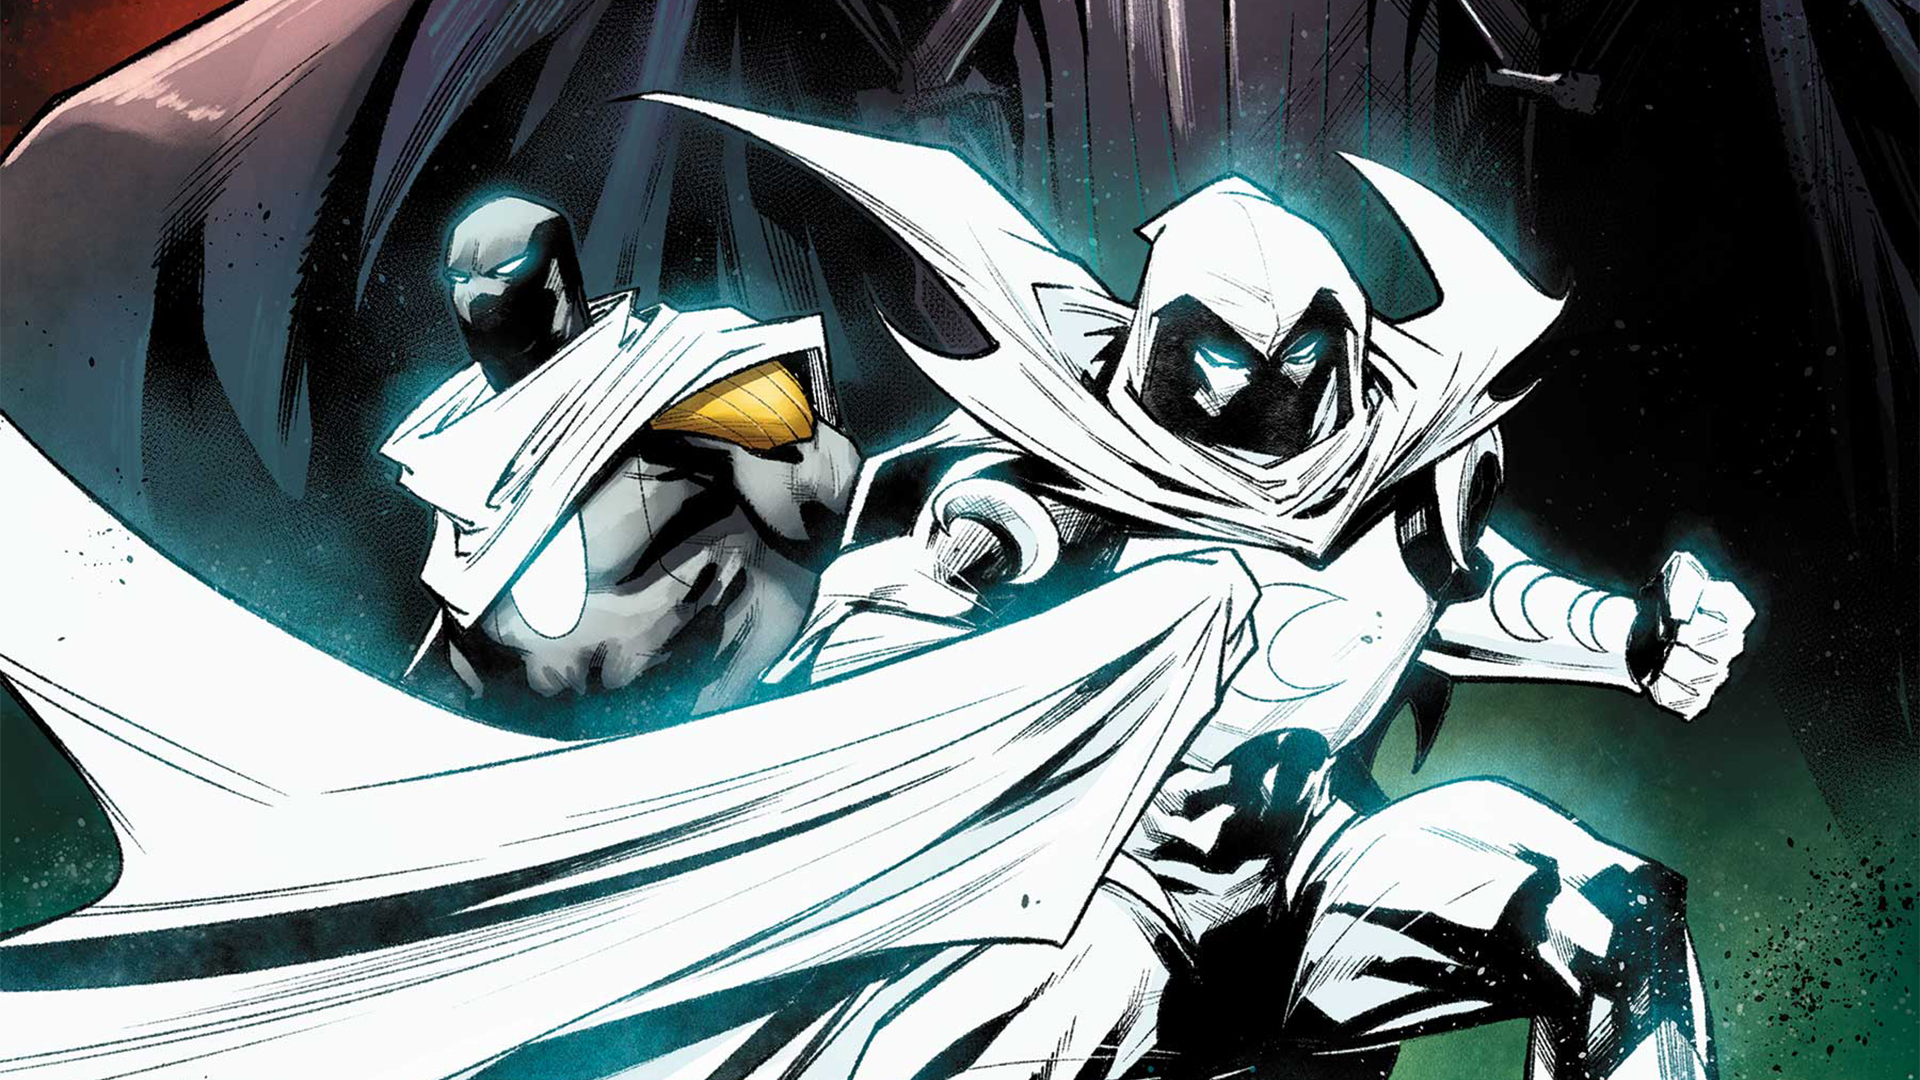 Moon Knight Trailer Breakdown: 11 Things You Must See – Page 10